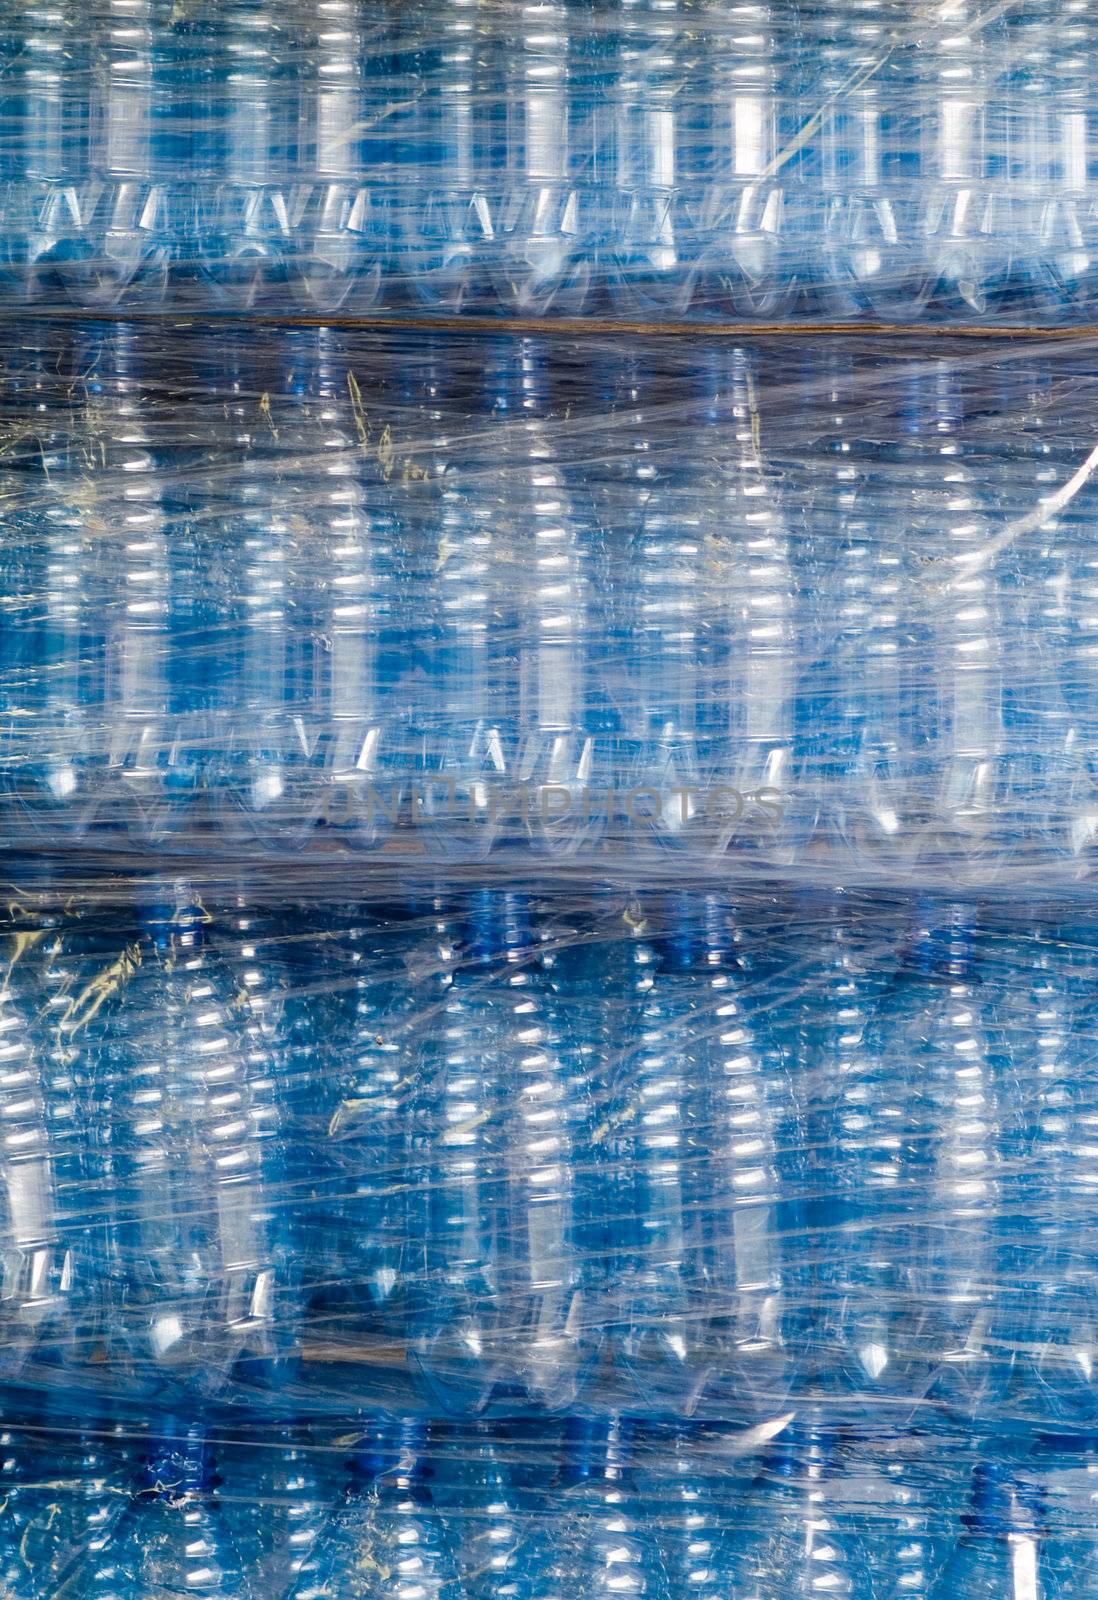 Plastic wrapping over finished water bottles in factory, warehouse industry